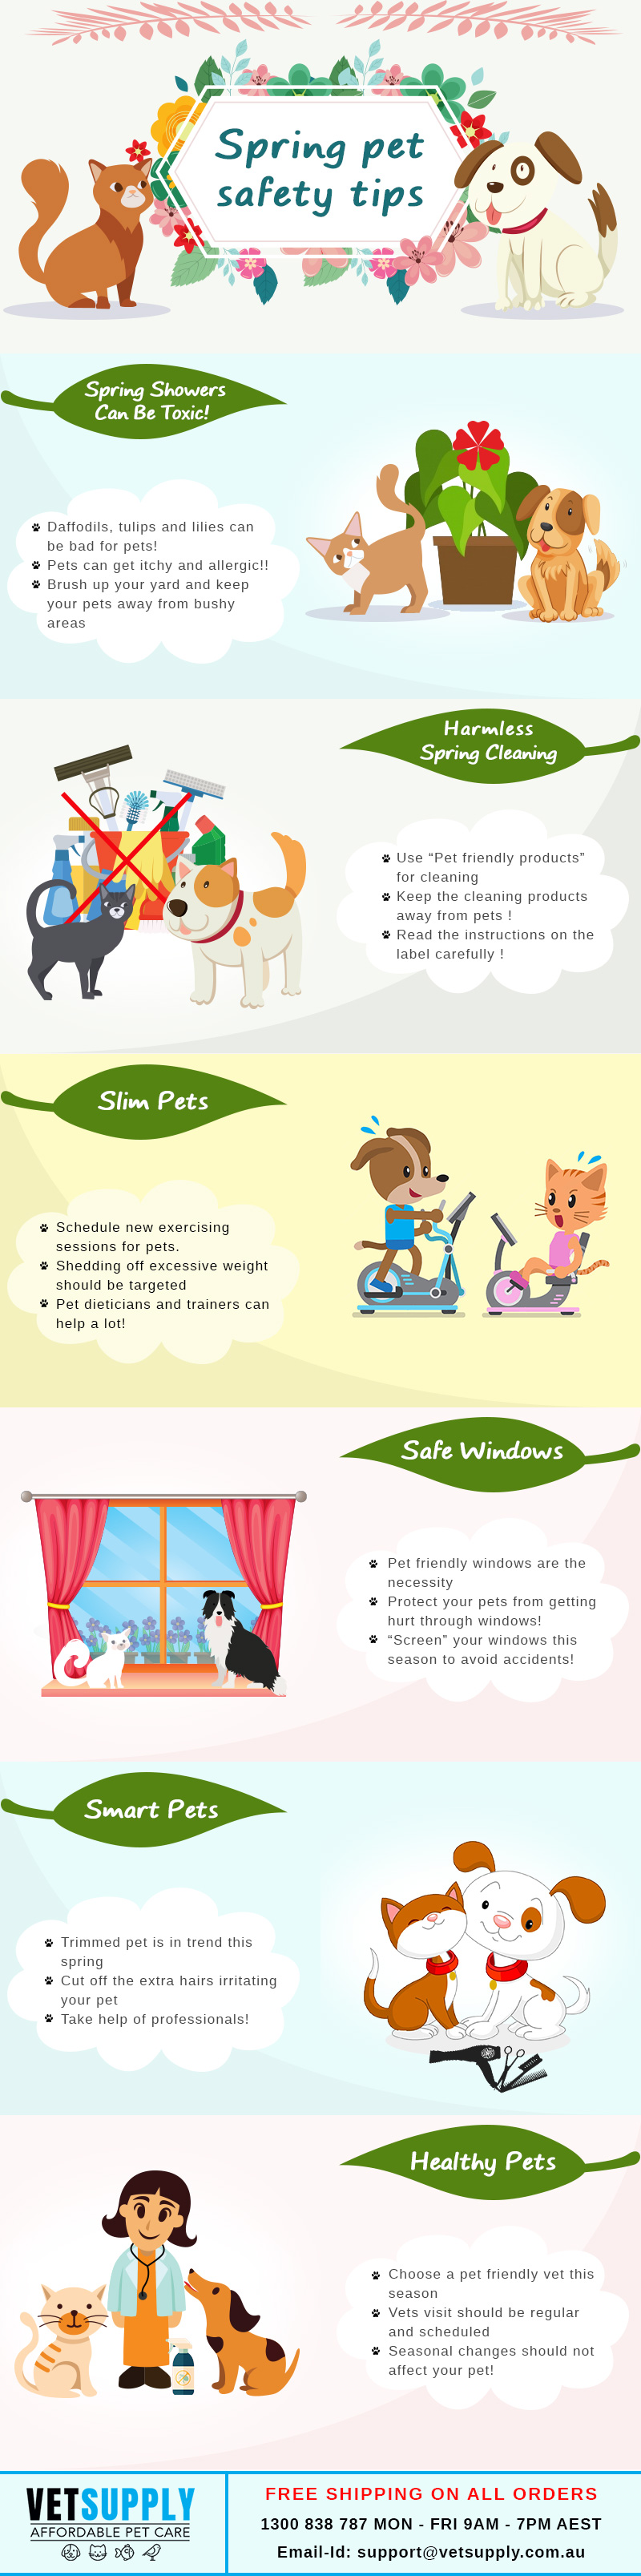 spring-safaty-tips-for-pet-Final